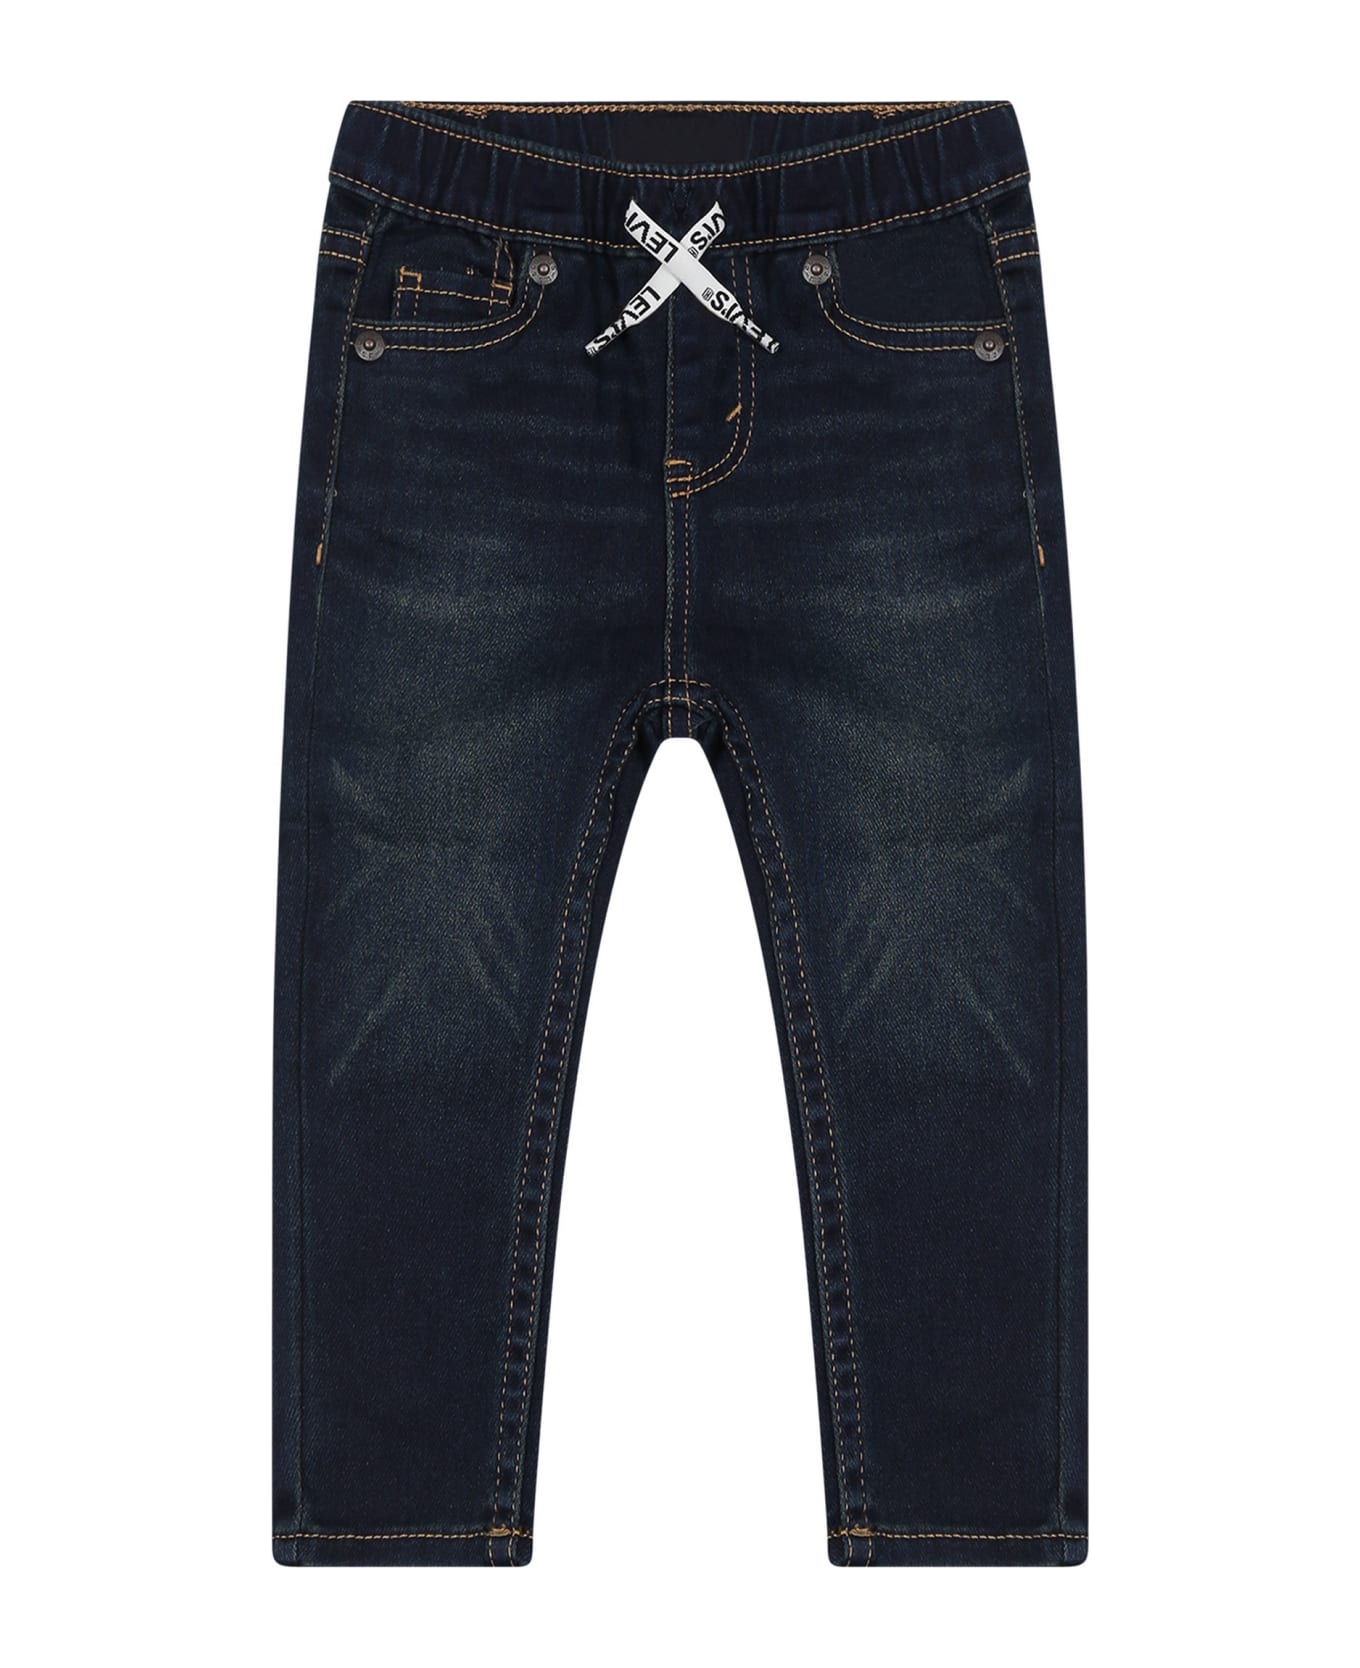 Levi's Blue Jeans For Baby Boy With Patch Logo - Denim ボトムス